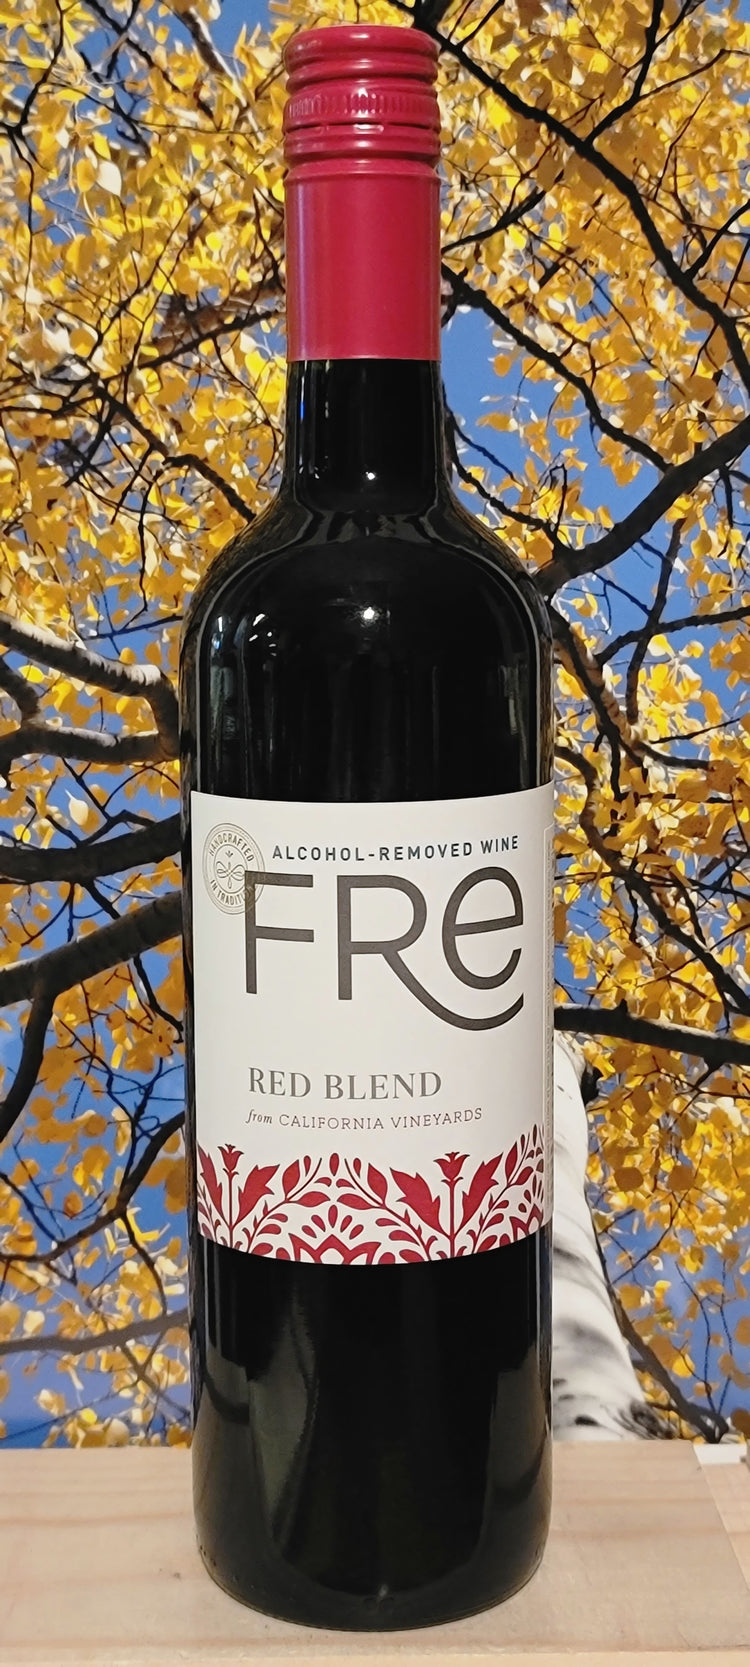 Sutter home fre red blend